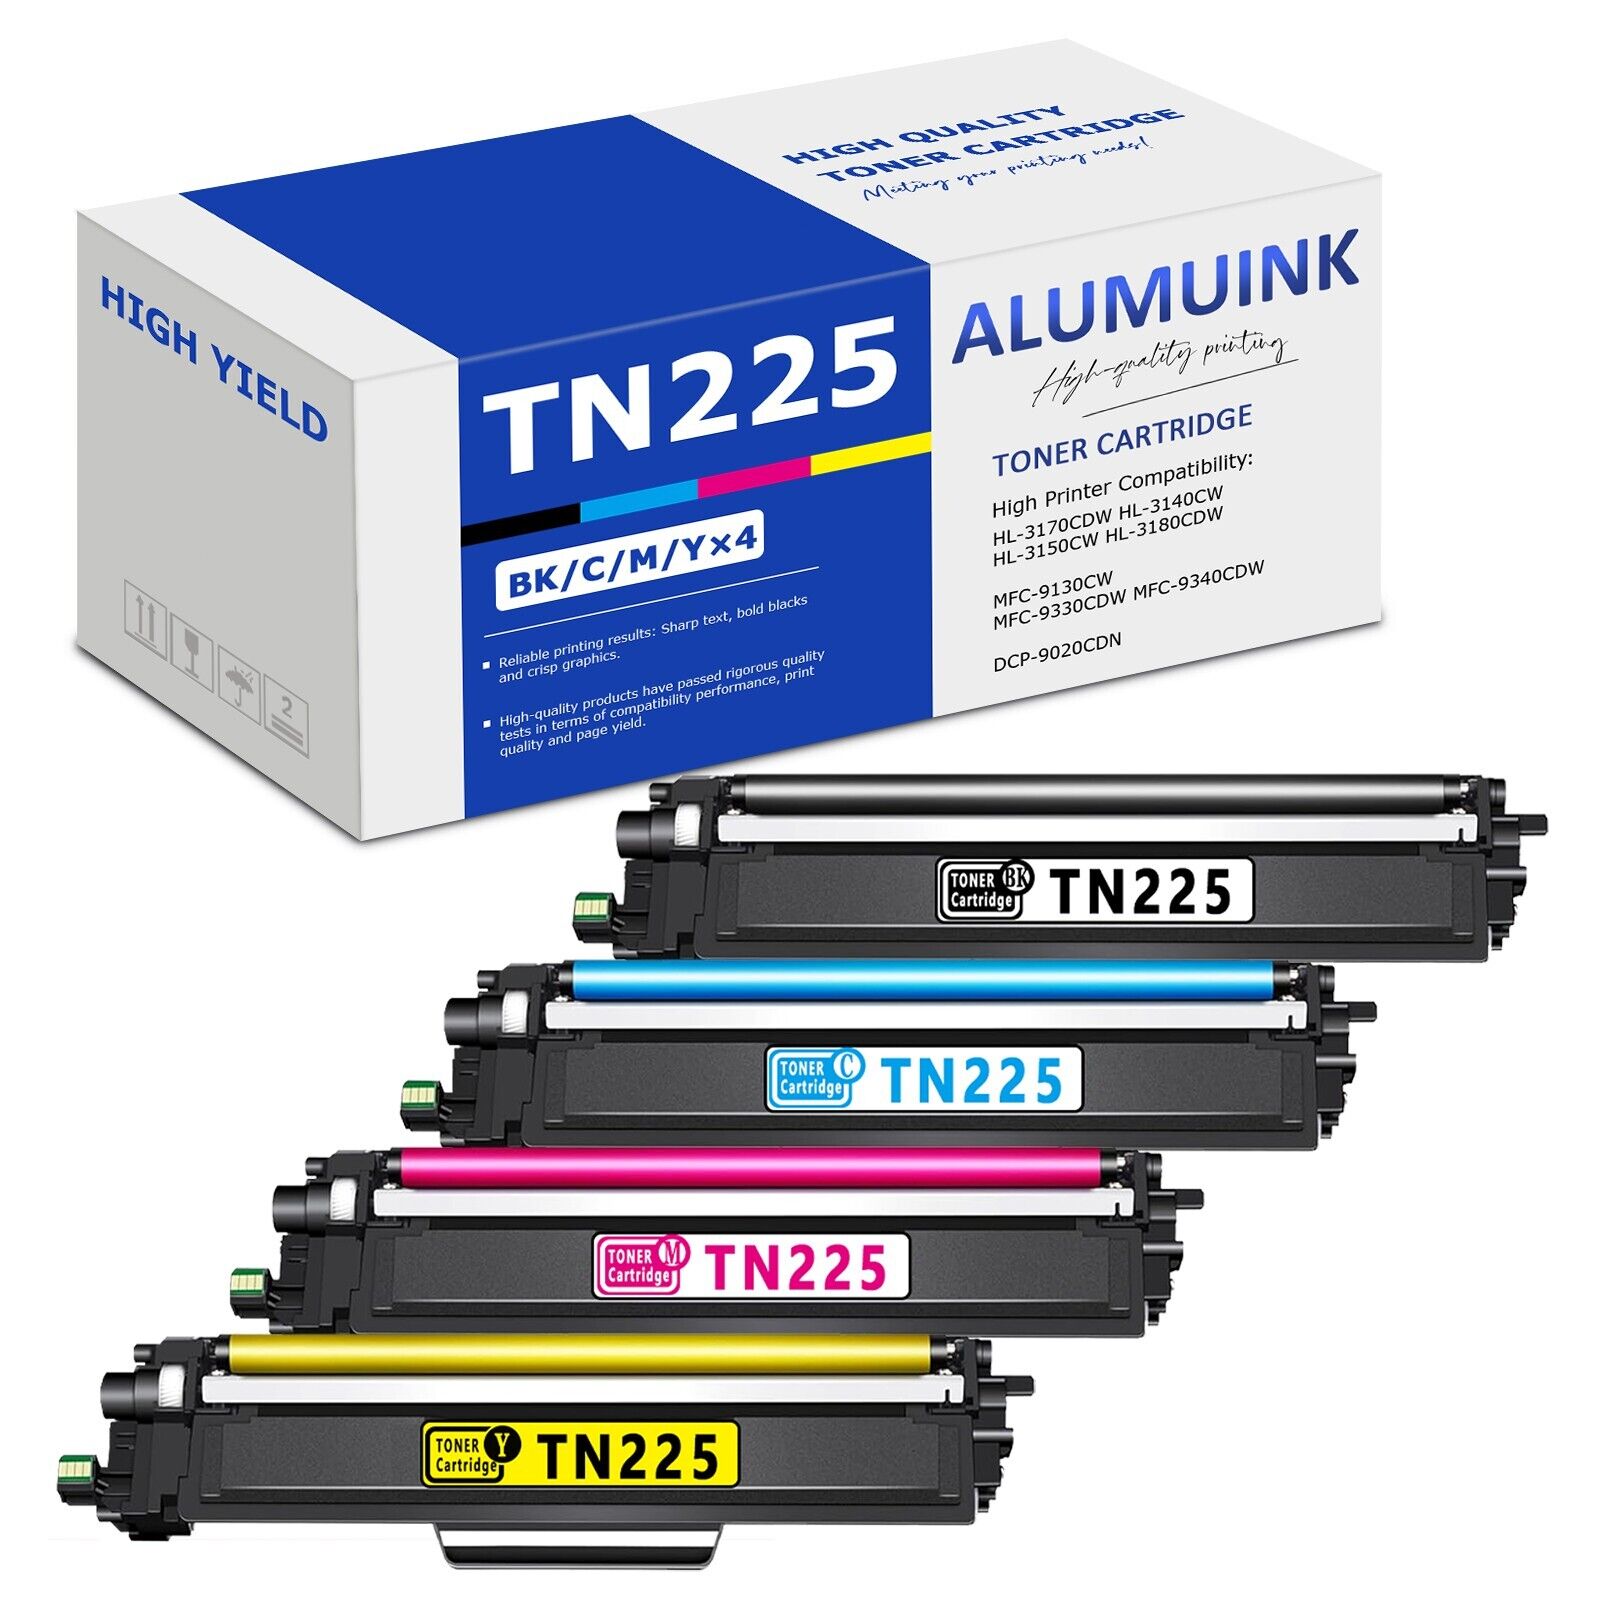 4PK TN225 Toner Cartridge Replacement for Brother MFC-9330CDW Printer (BK/C/M/Y)